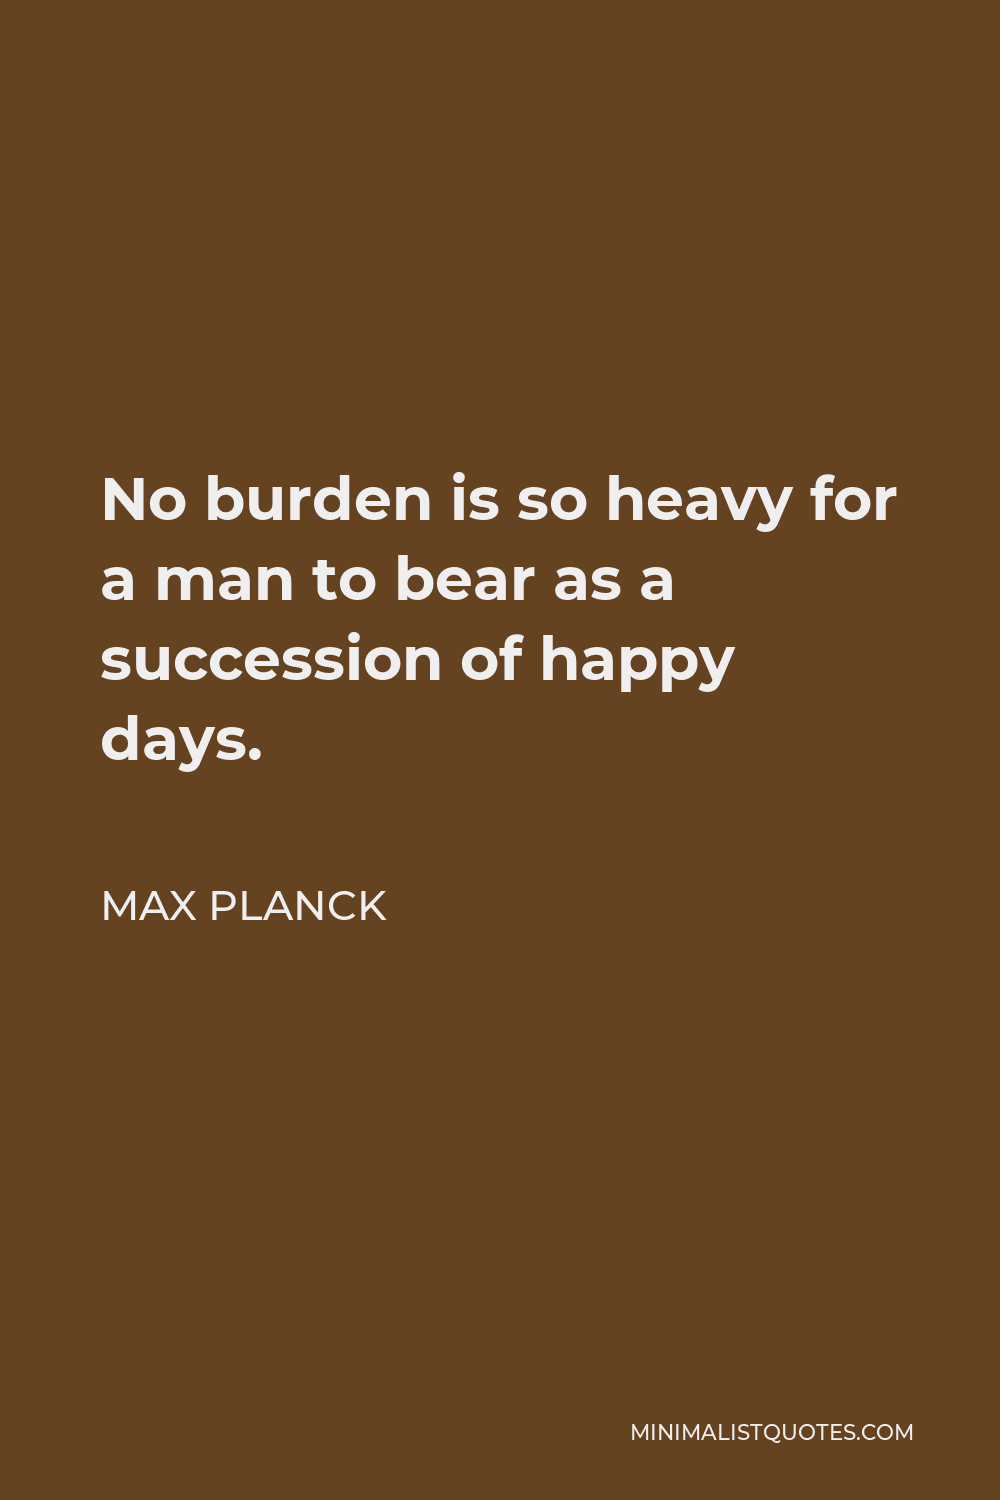 Max Planck Quote - No burden is so heavy for a man to bear as a succession of happy days.